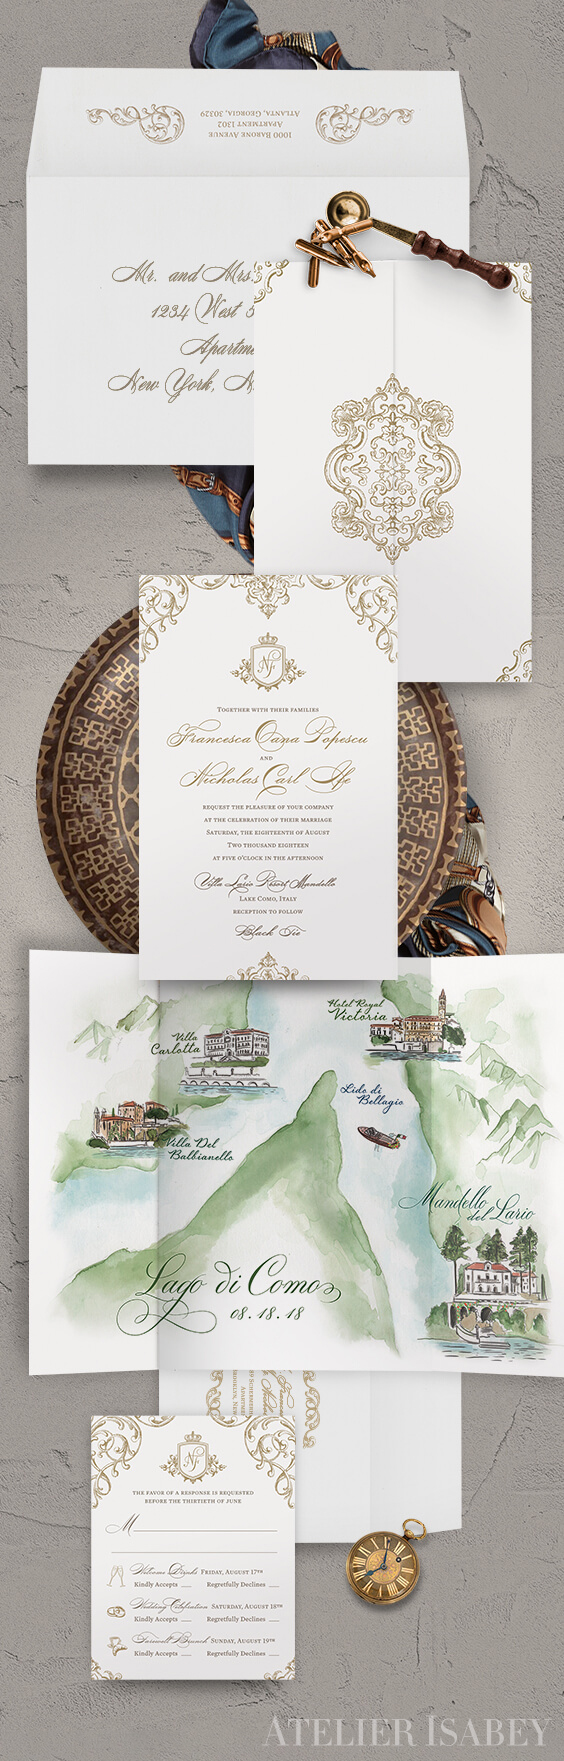 Classic wedding invitation with a watercolor map of Lake Como